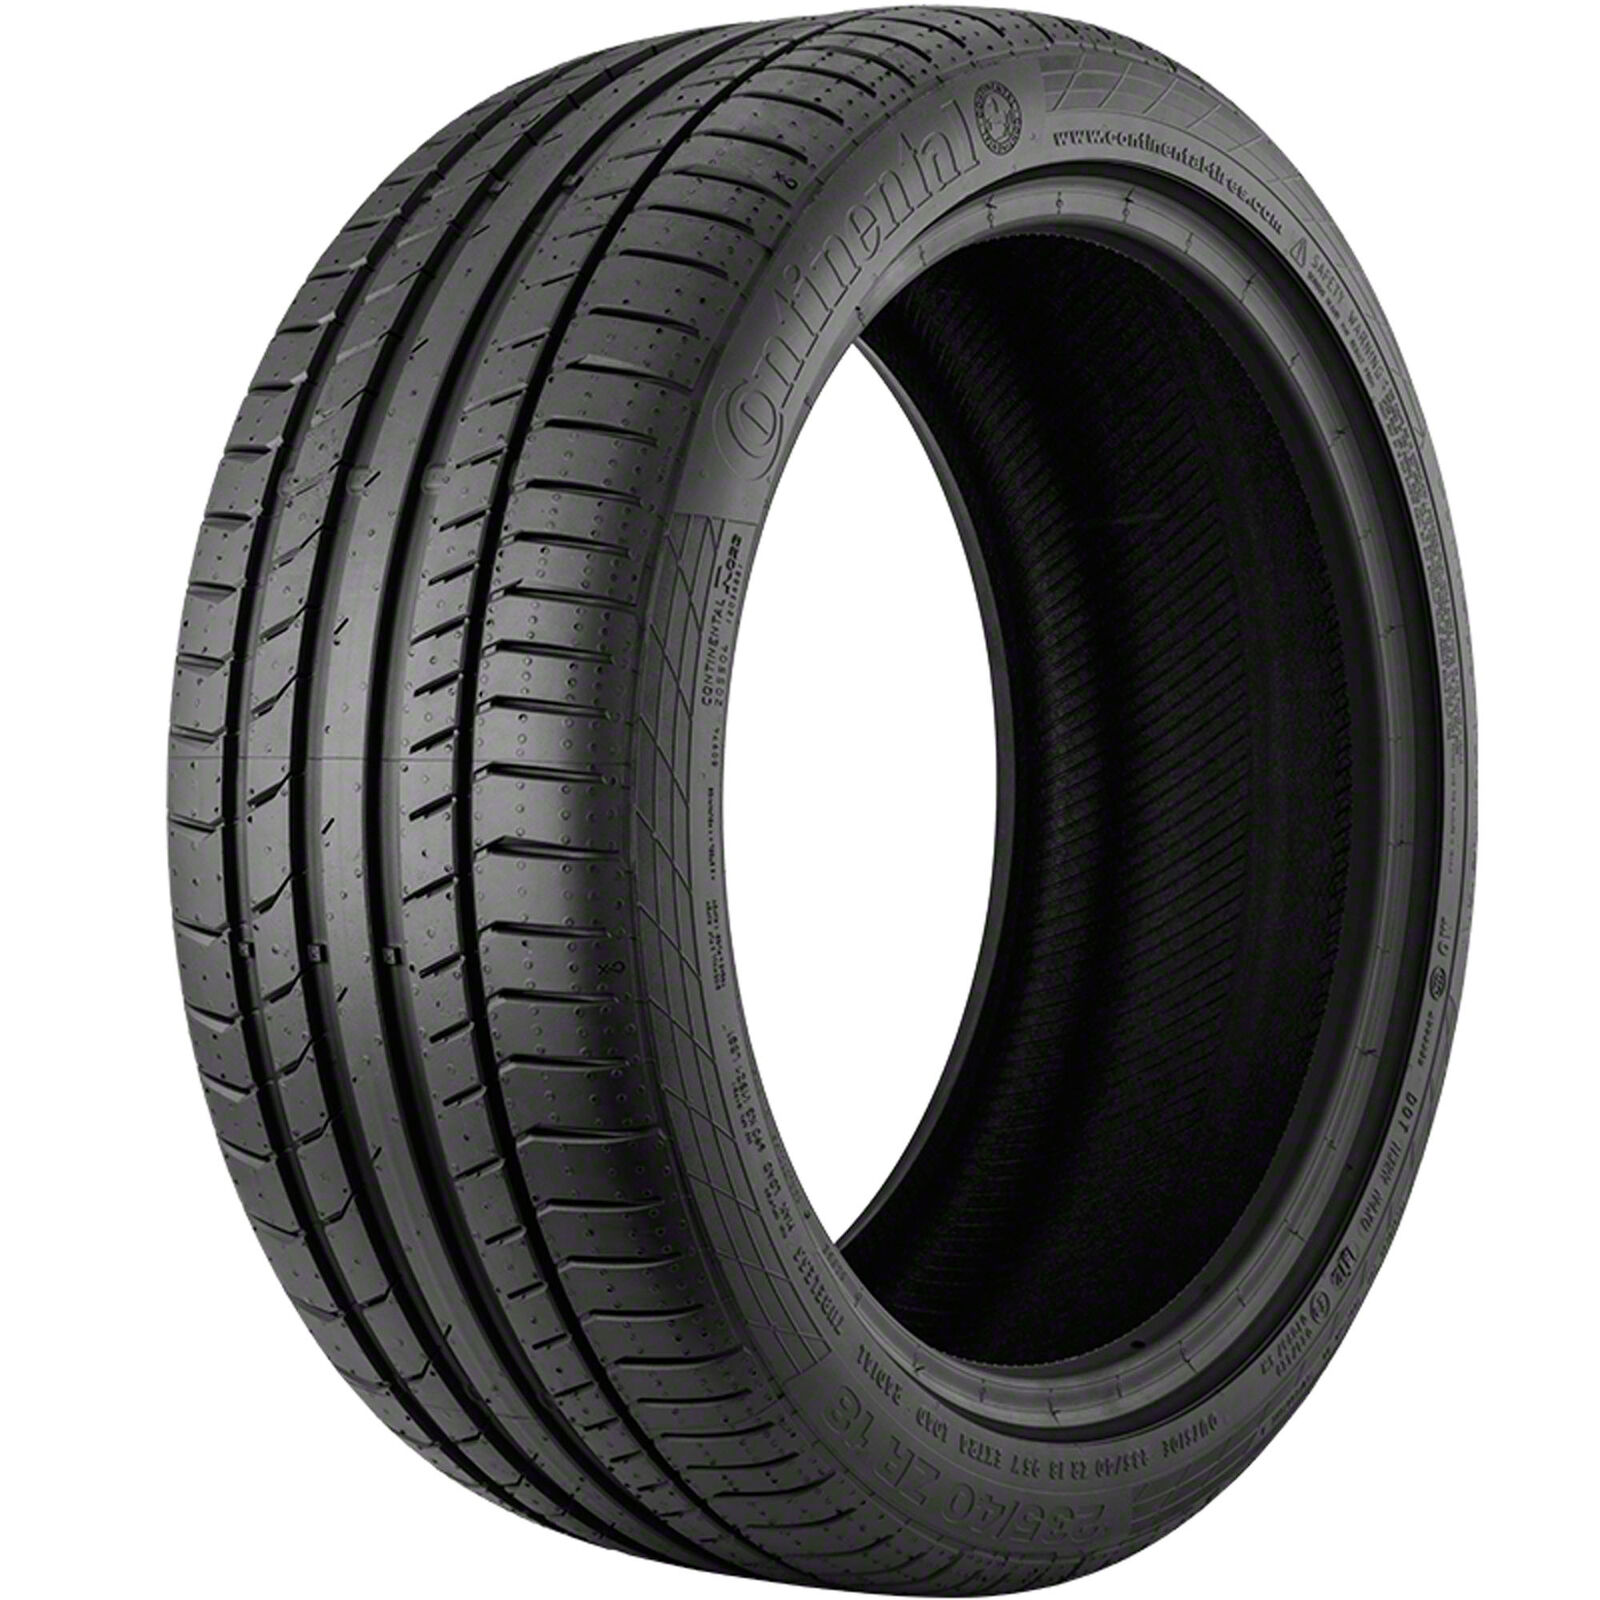 1 New Continental Contisportcontact 5p  - 325/35zr22 Tires 3253522 325 35 22